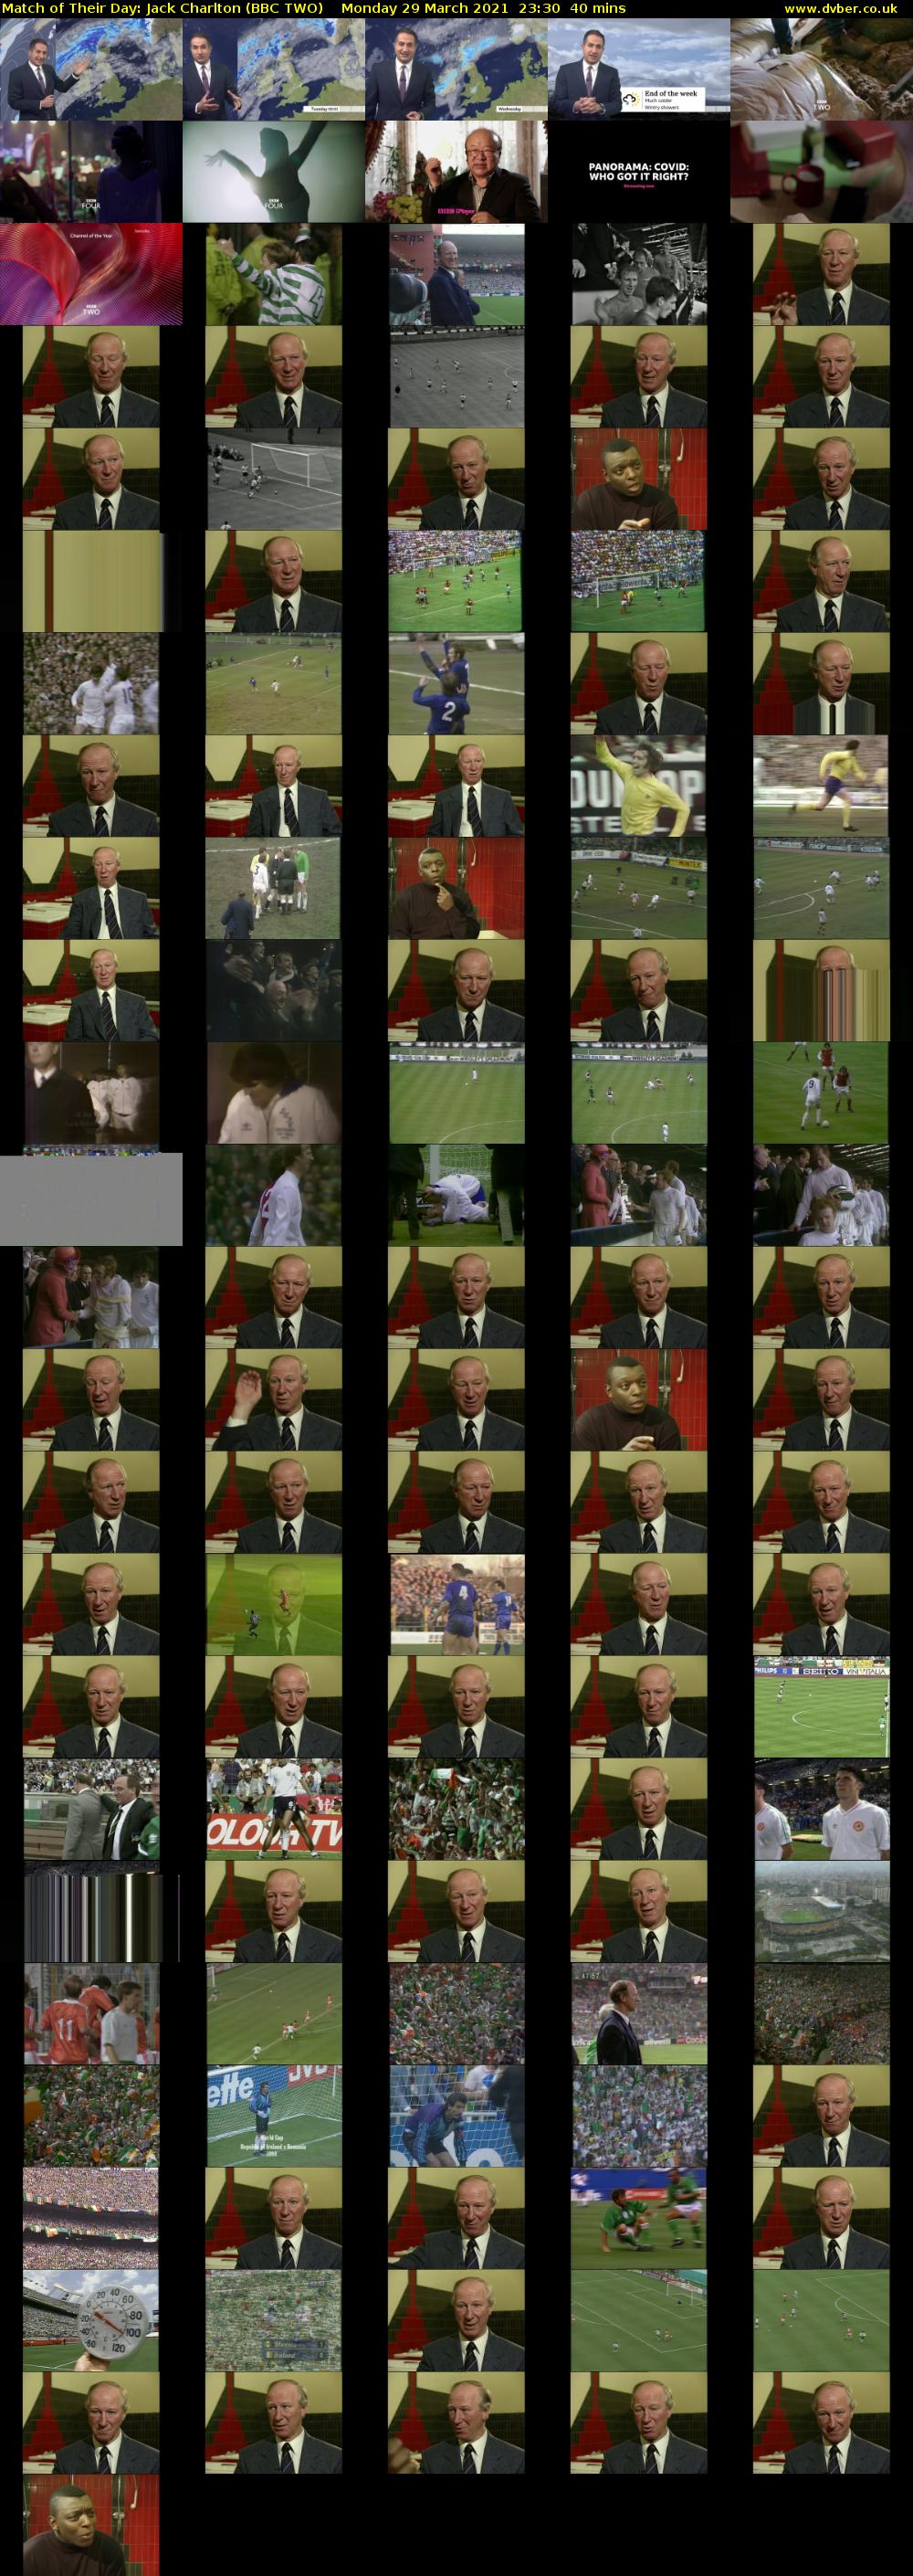 Match of Their Day: Jack Charlton (BBC TWO) Monday 29 March 2021 23:30 - 00:10